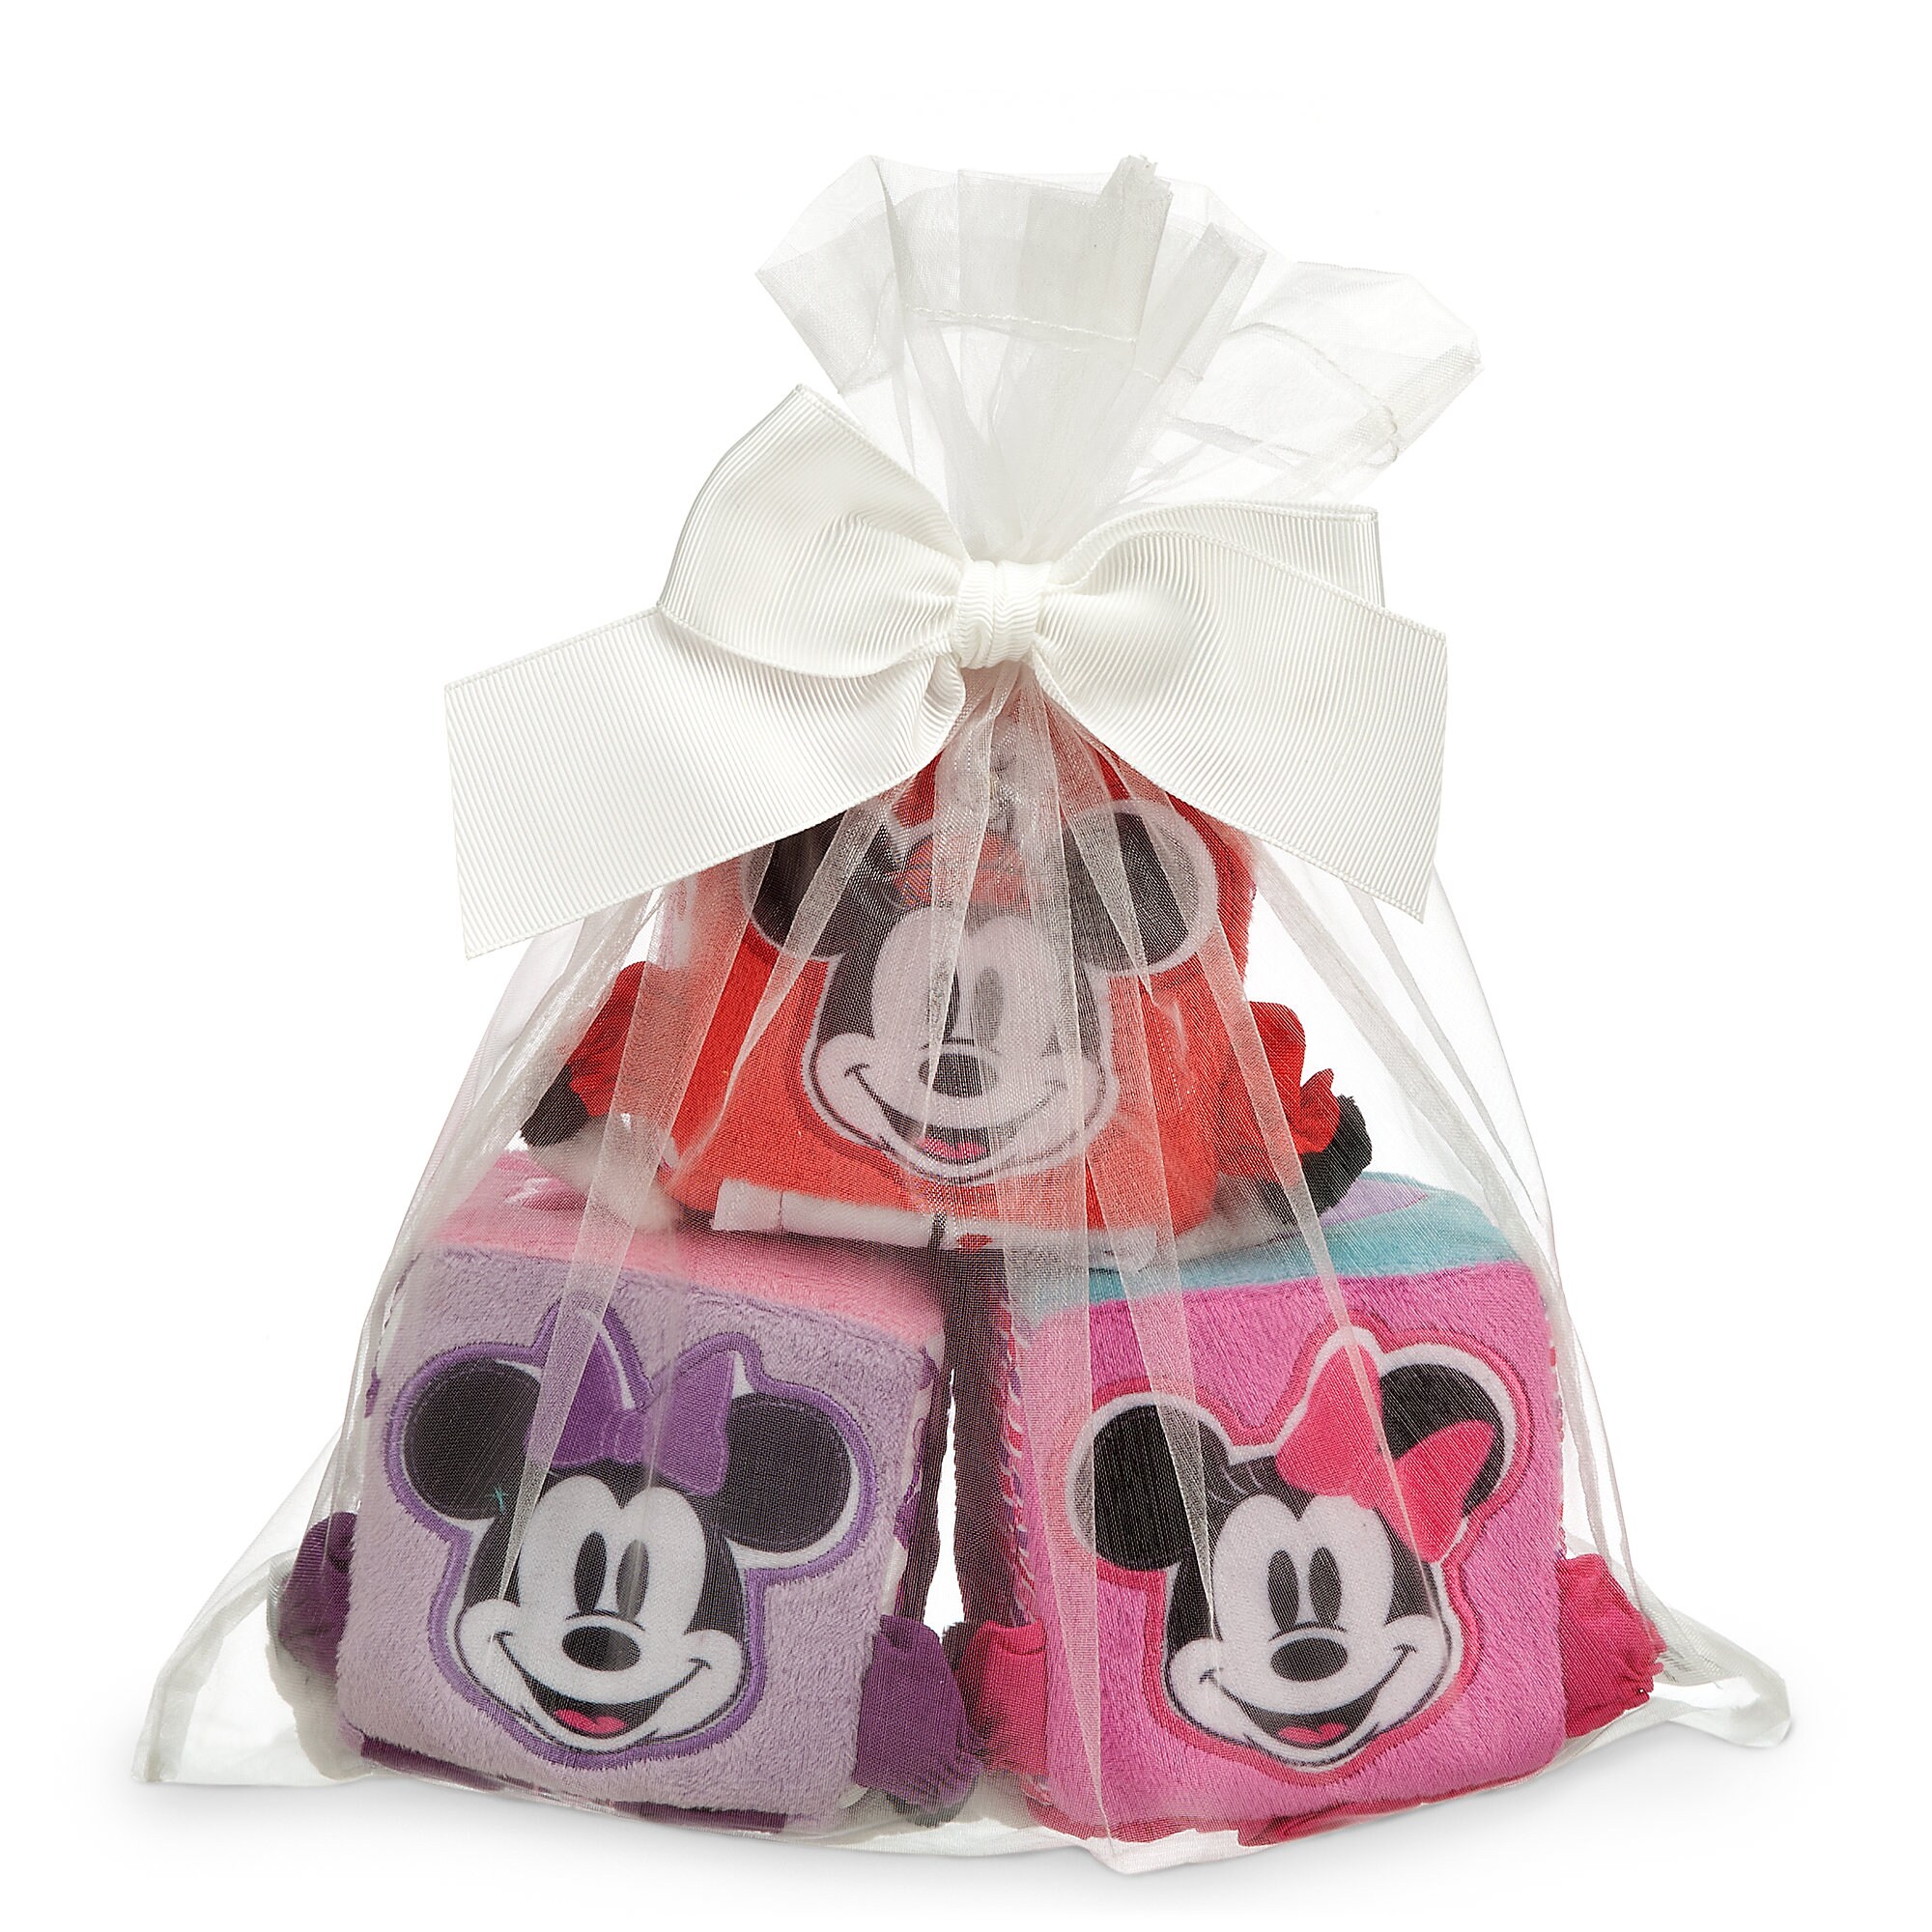 Minnie Mouse Soft Blocks for Baby